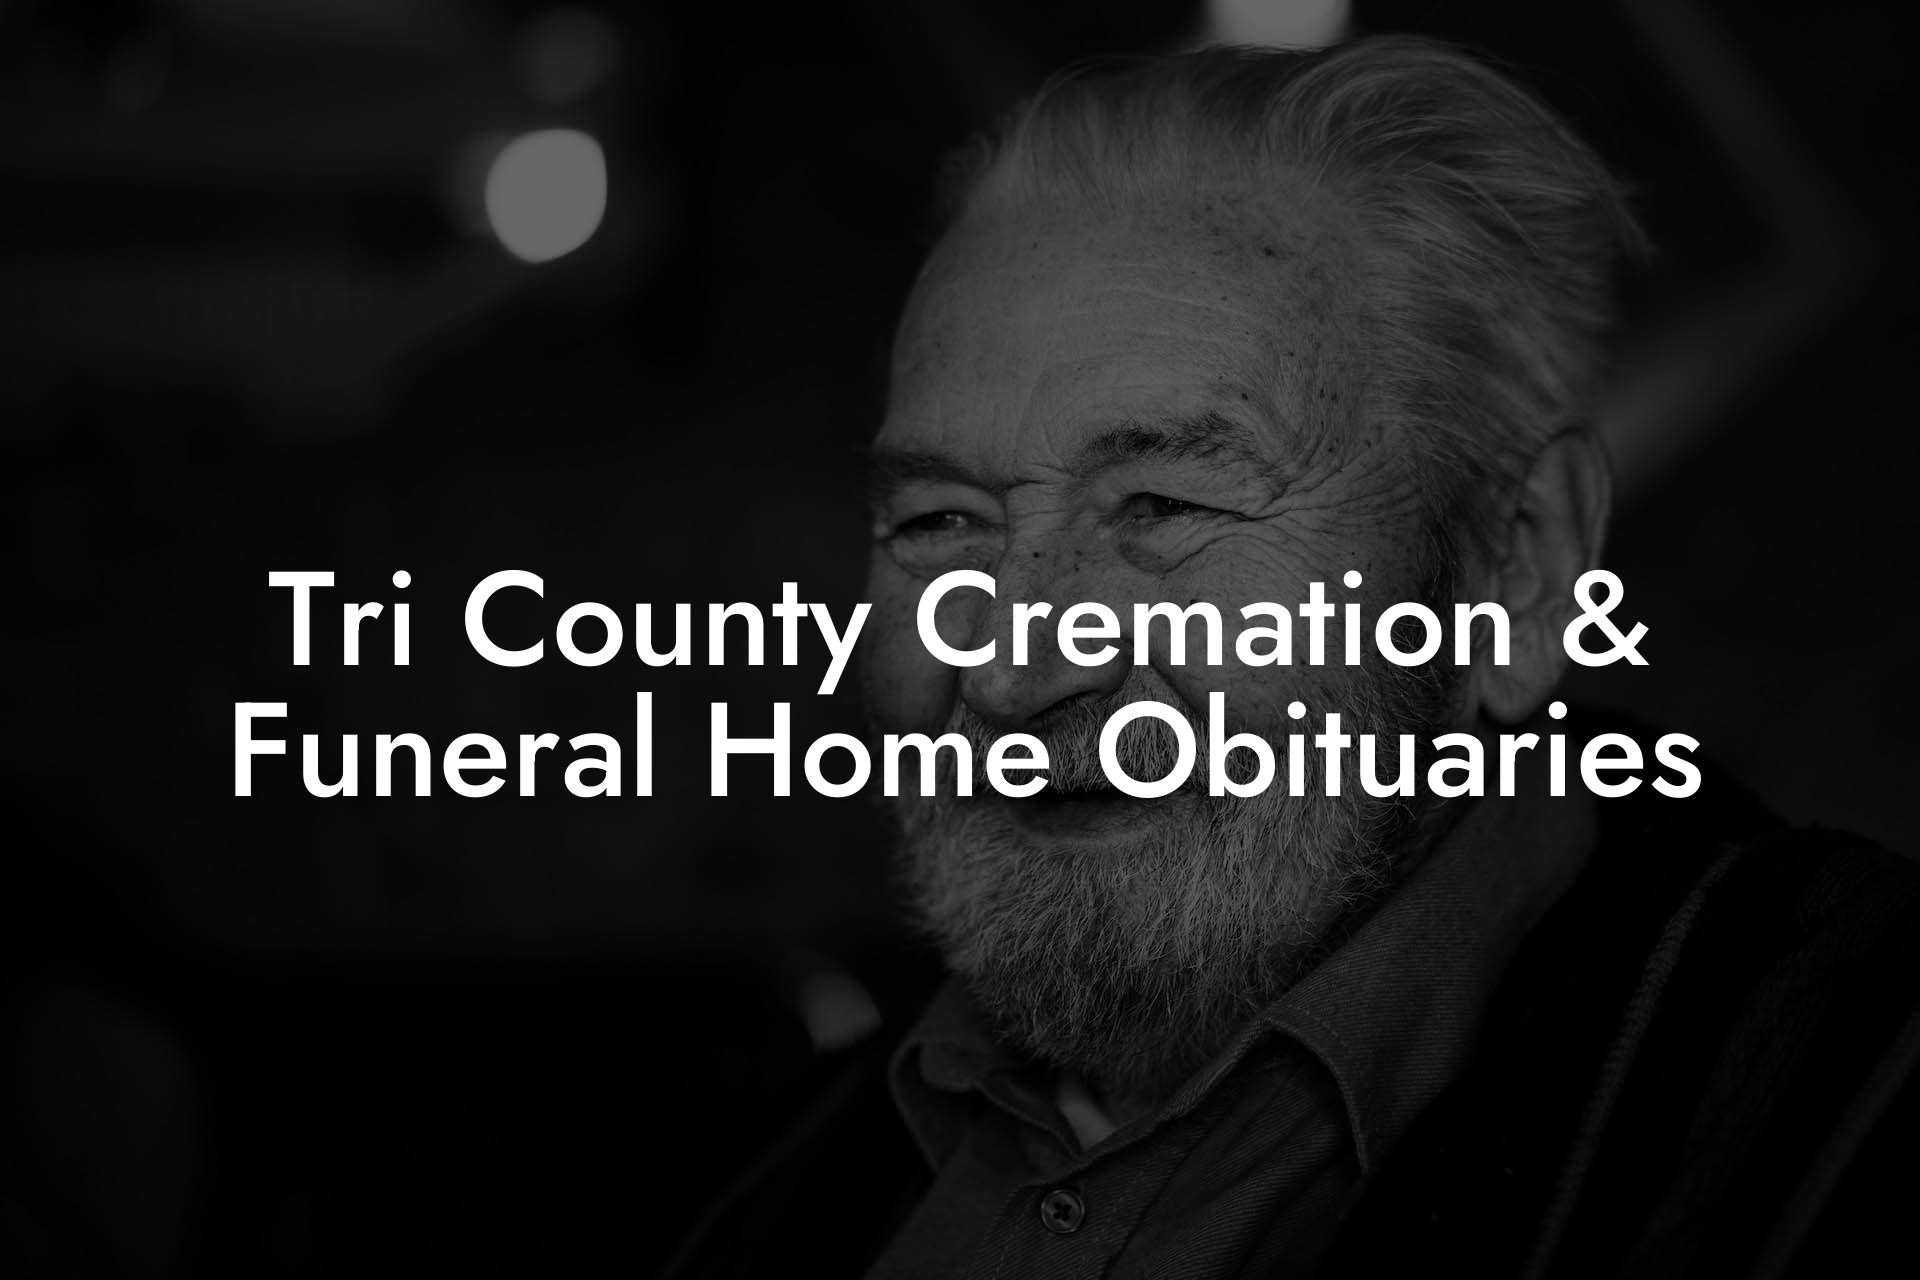 Tri County Cremation & Funeral Home Obituaries